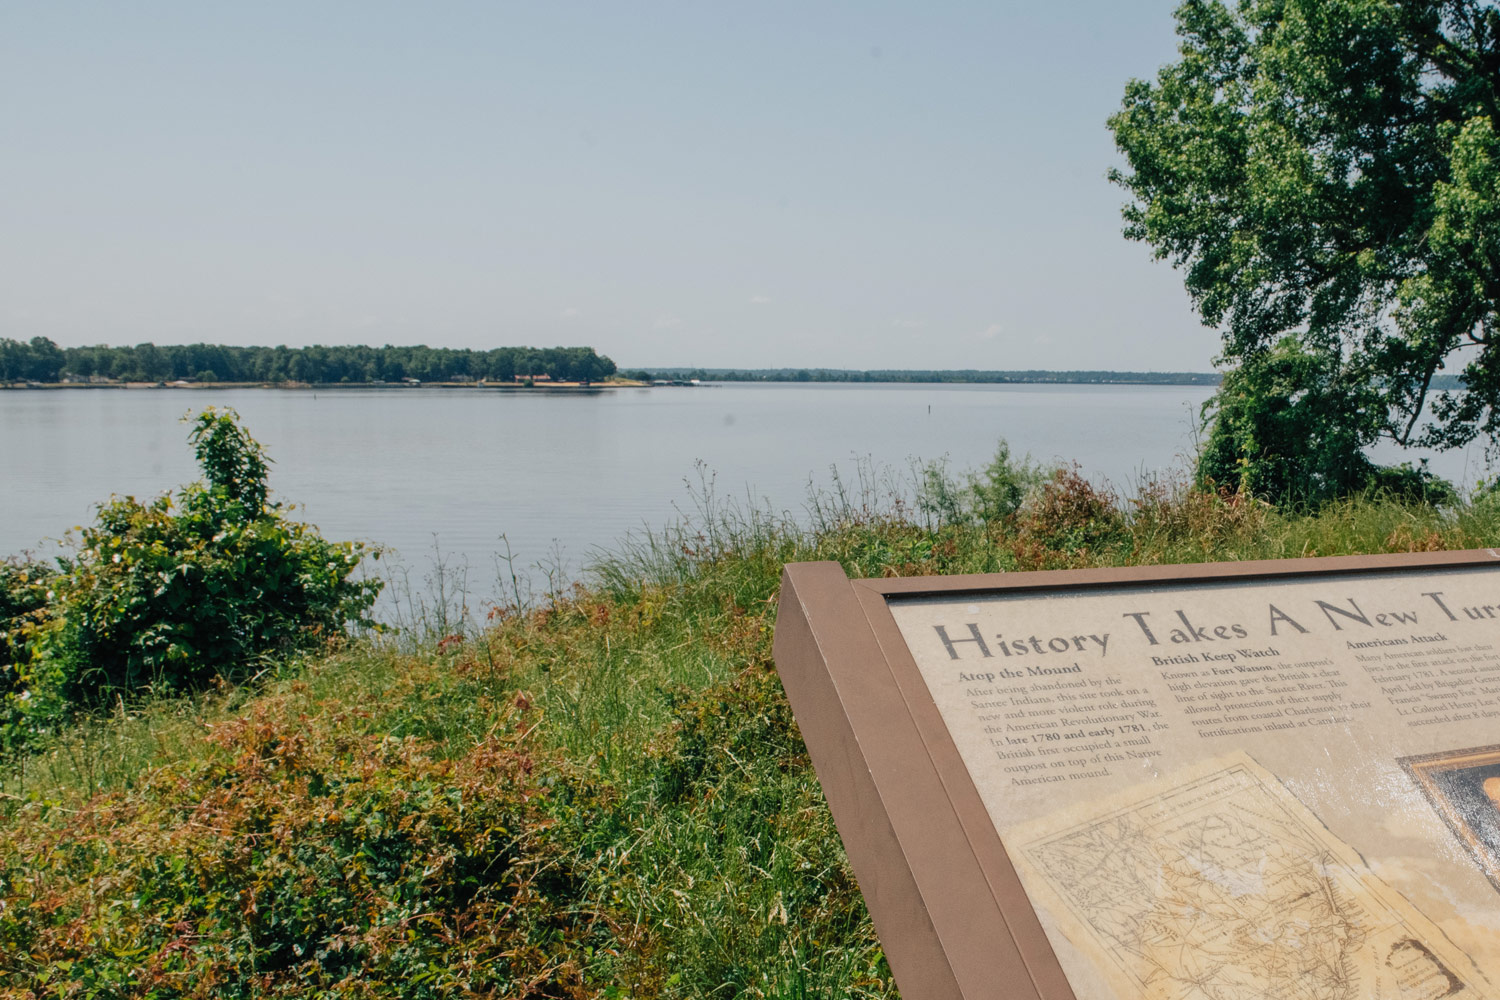 educational signage atop the Indian Mound in Santee, overlooking the lake